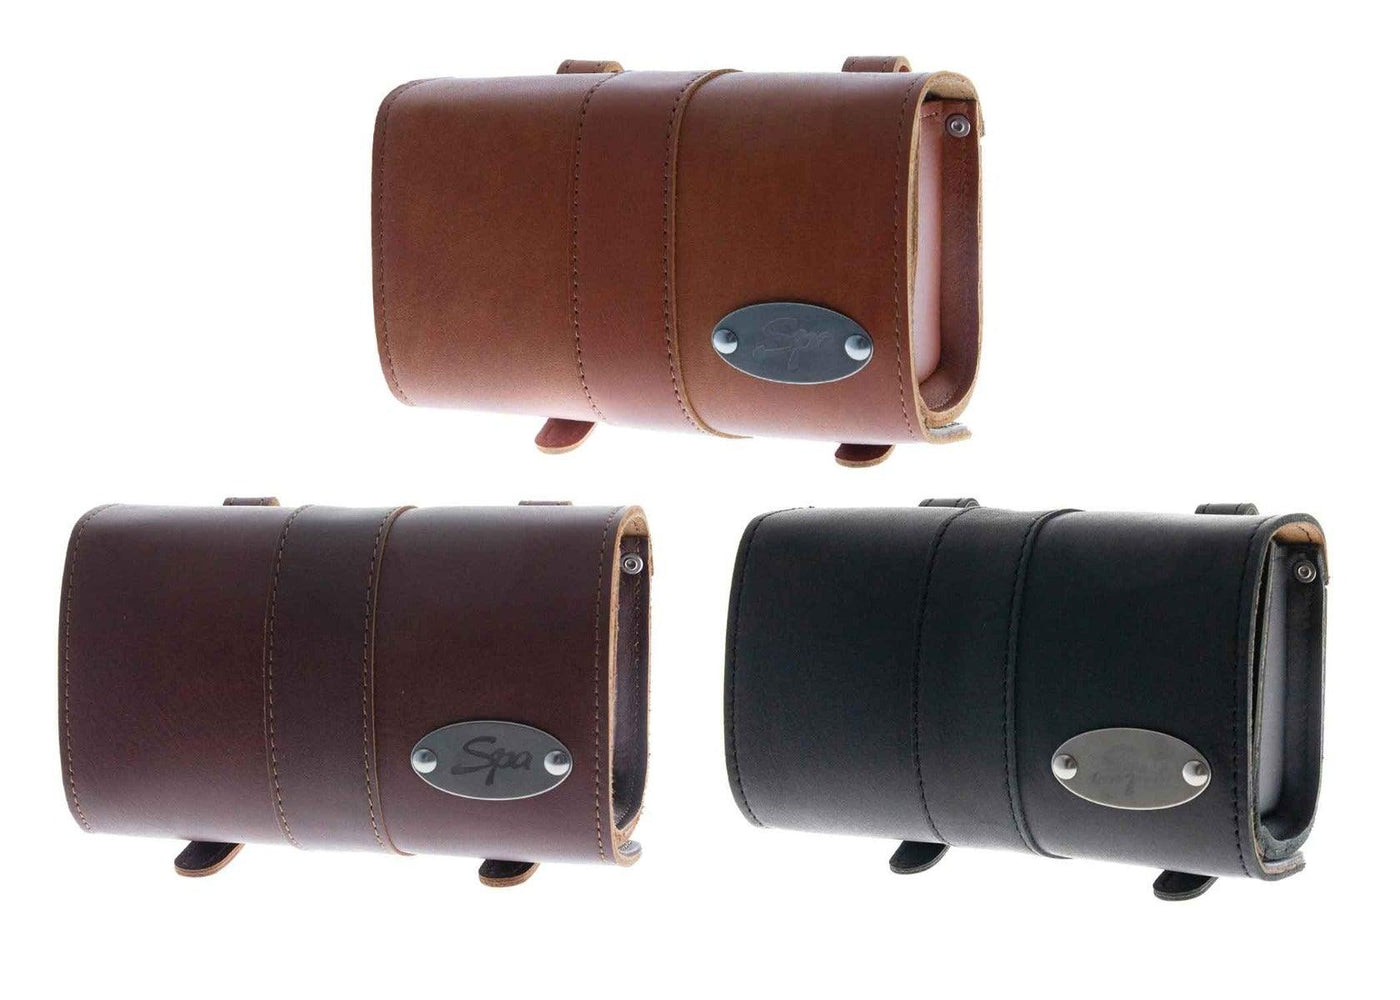 LEATHER SPA - Bags